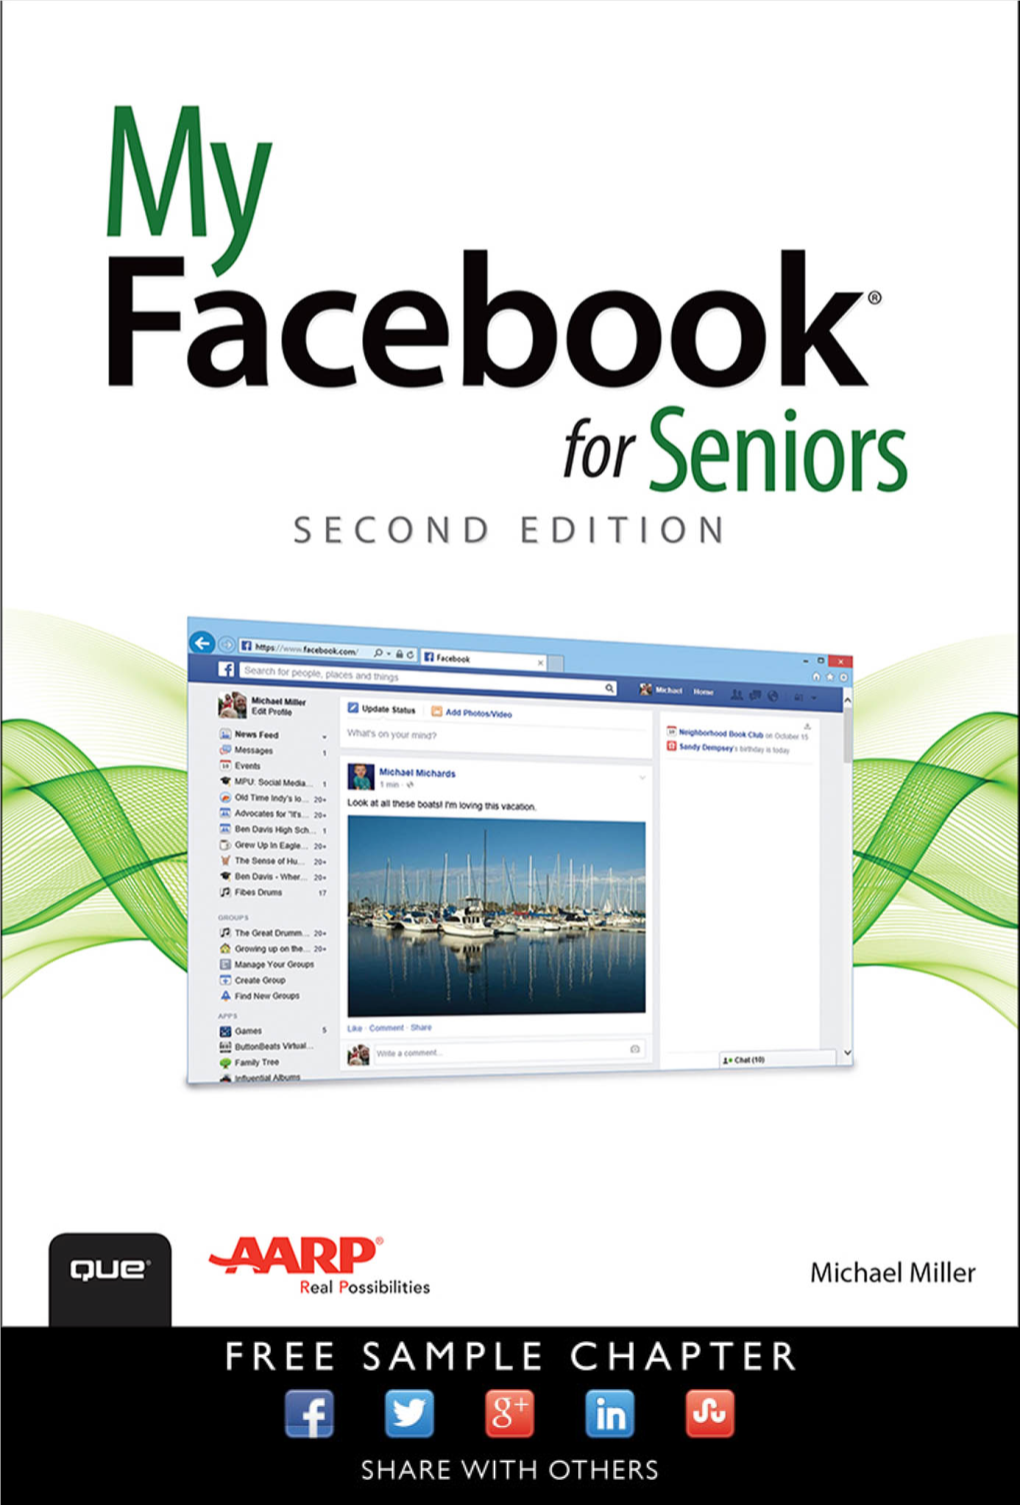 My Facebook® for Seniors SECOND EDITION